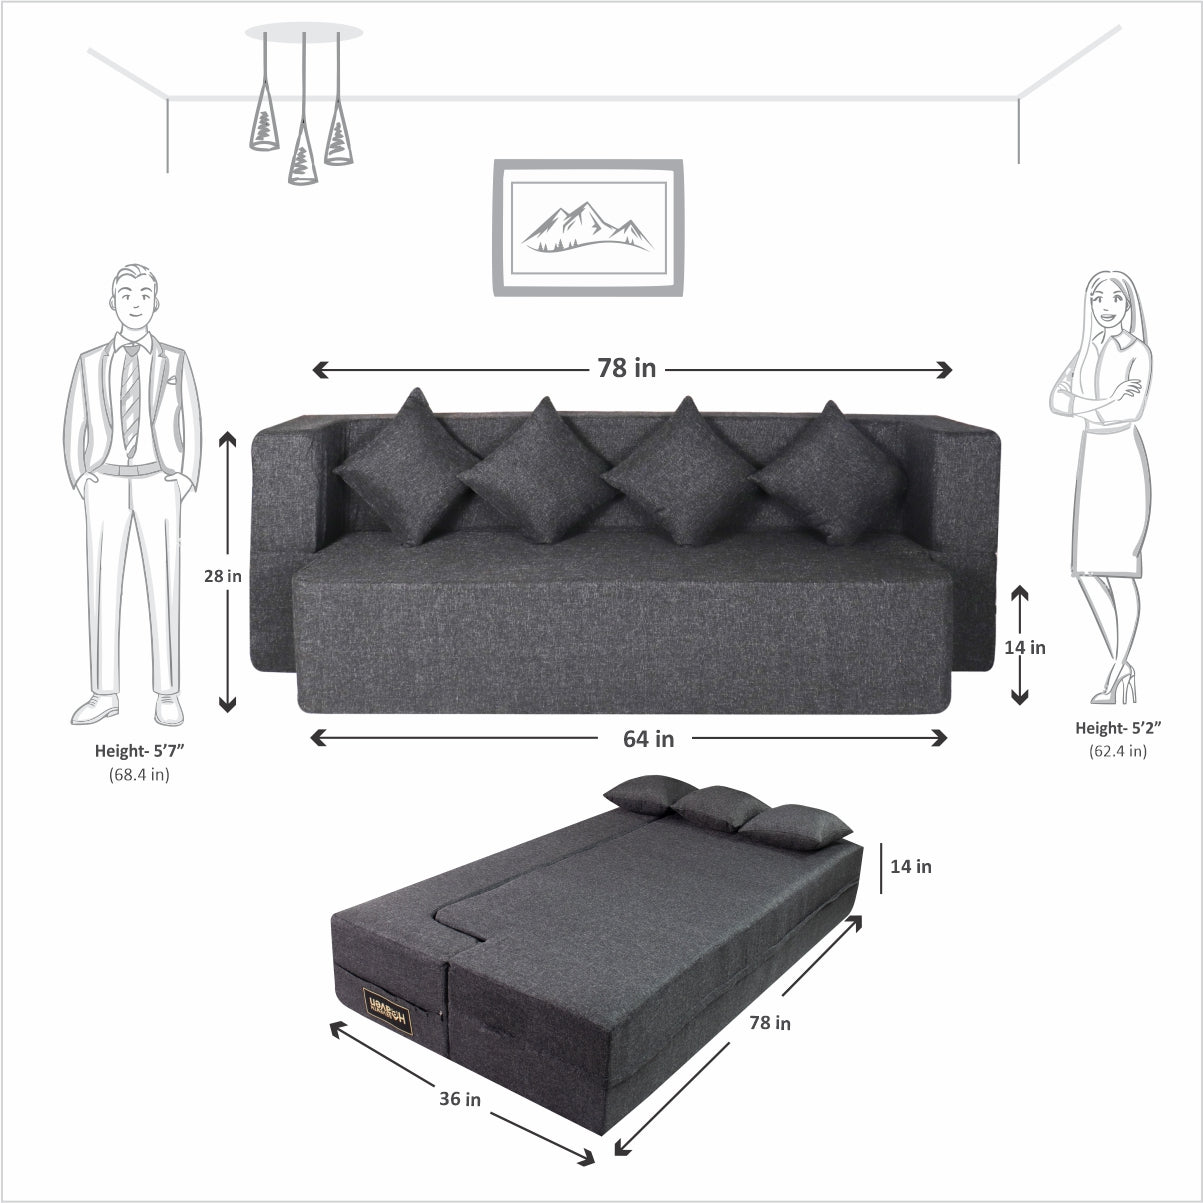 Cover of Grey Jute Fabric (78"x36"x14") FlipperX Sofa cum Bed with 4 Plain Cushion Covers